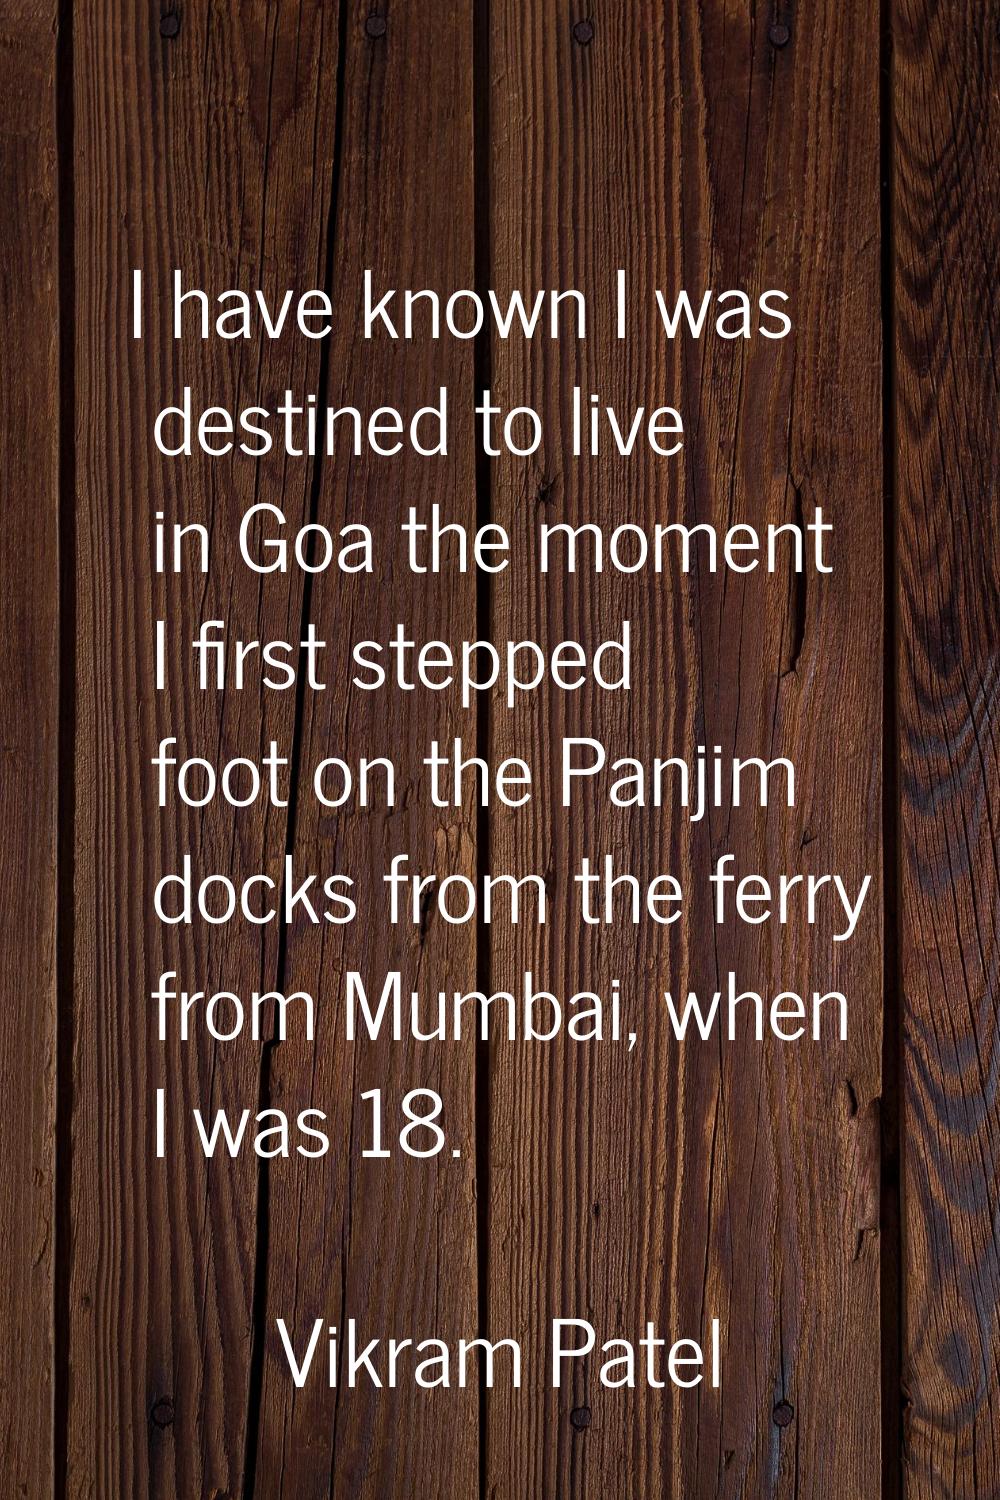 I have known I was destined to live in Goa the moment I first stepped foot on the Panjim docks from